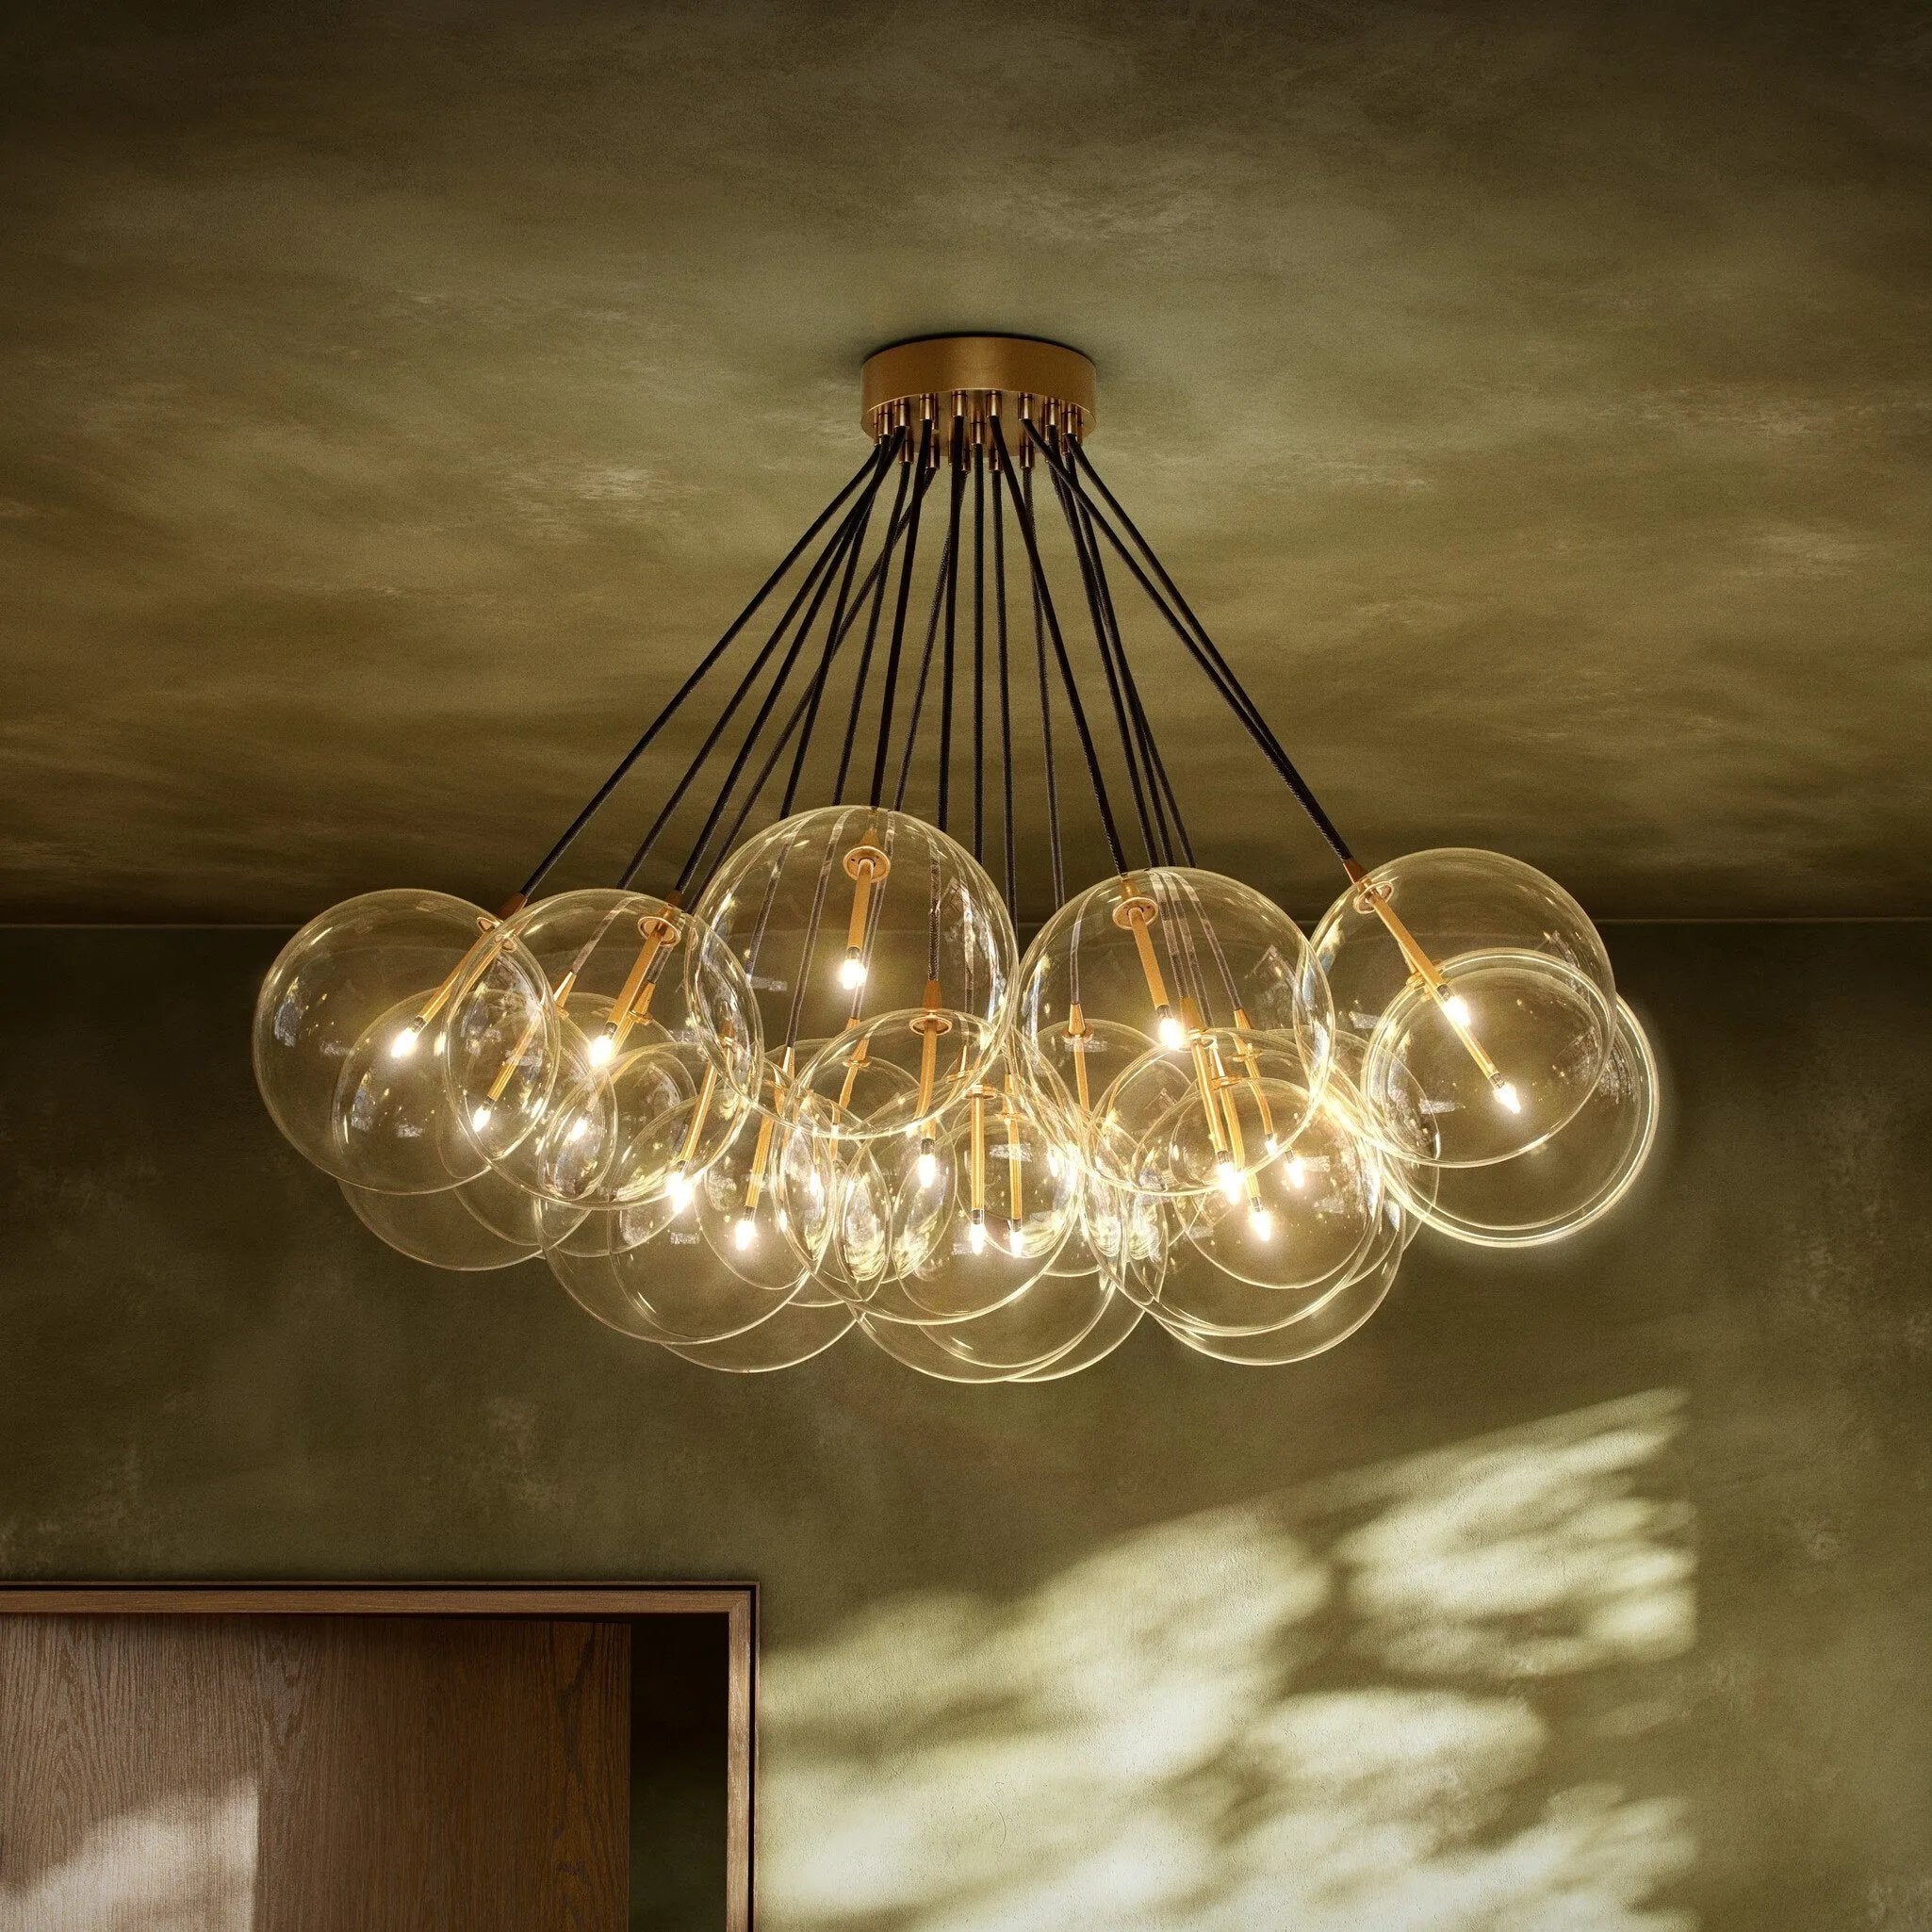 Clear glass bulbs dangle for a statement-making centerpiece. Each globe is individually blown, shaped and sculpted by hand through a one-hour process. Brass and glass are 98% recyclable. Designed and sustainably crafted in Poland by Schwung.Overall Dimensions47.00"w x 47.00"d x 33.50"hFull Details &amp; SpecificationsTear Shee Amethyst Home provides interior design, new home construction design consulting, vintage area rugs, and lighting in the Nashville metro area.